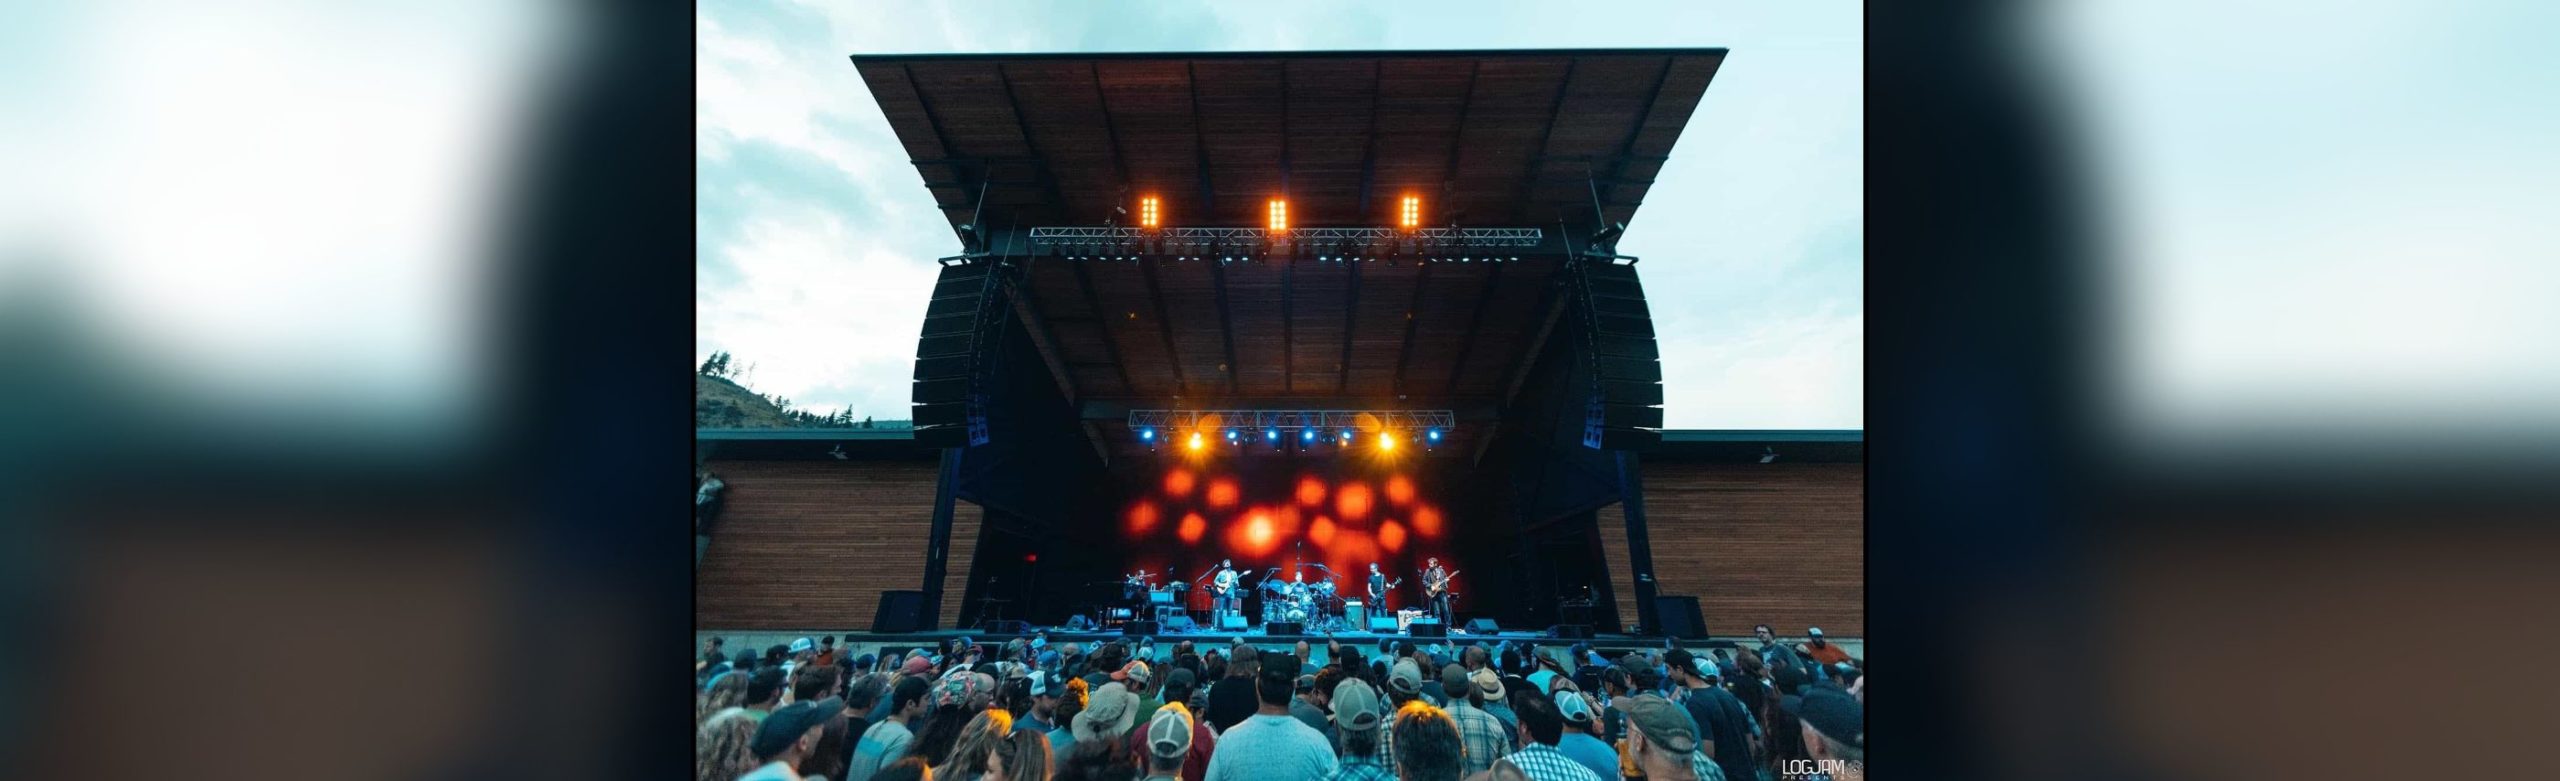 Listen Back: Joe Russo’s Almost Dead at KettleHouse Amphitheater in 2019 (Full Recording) Image